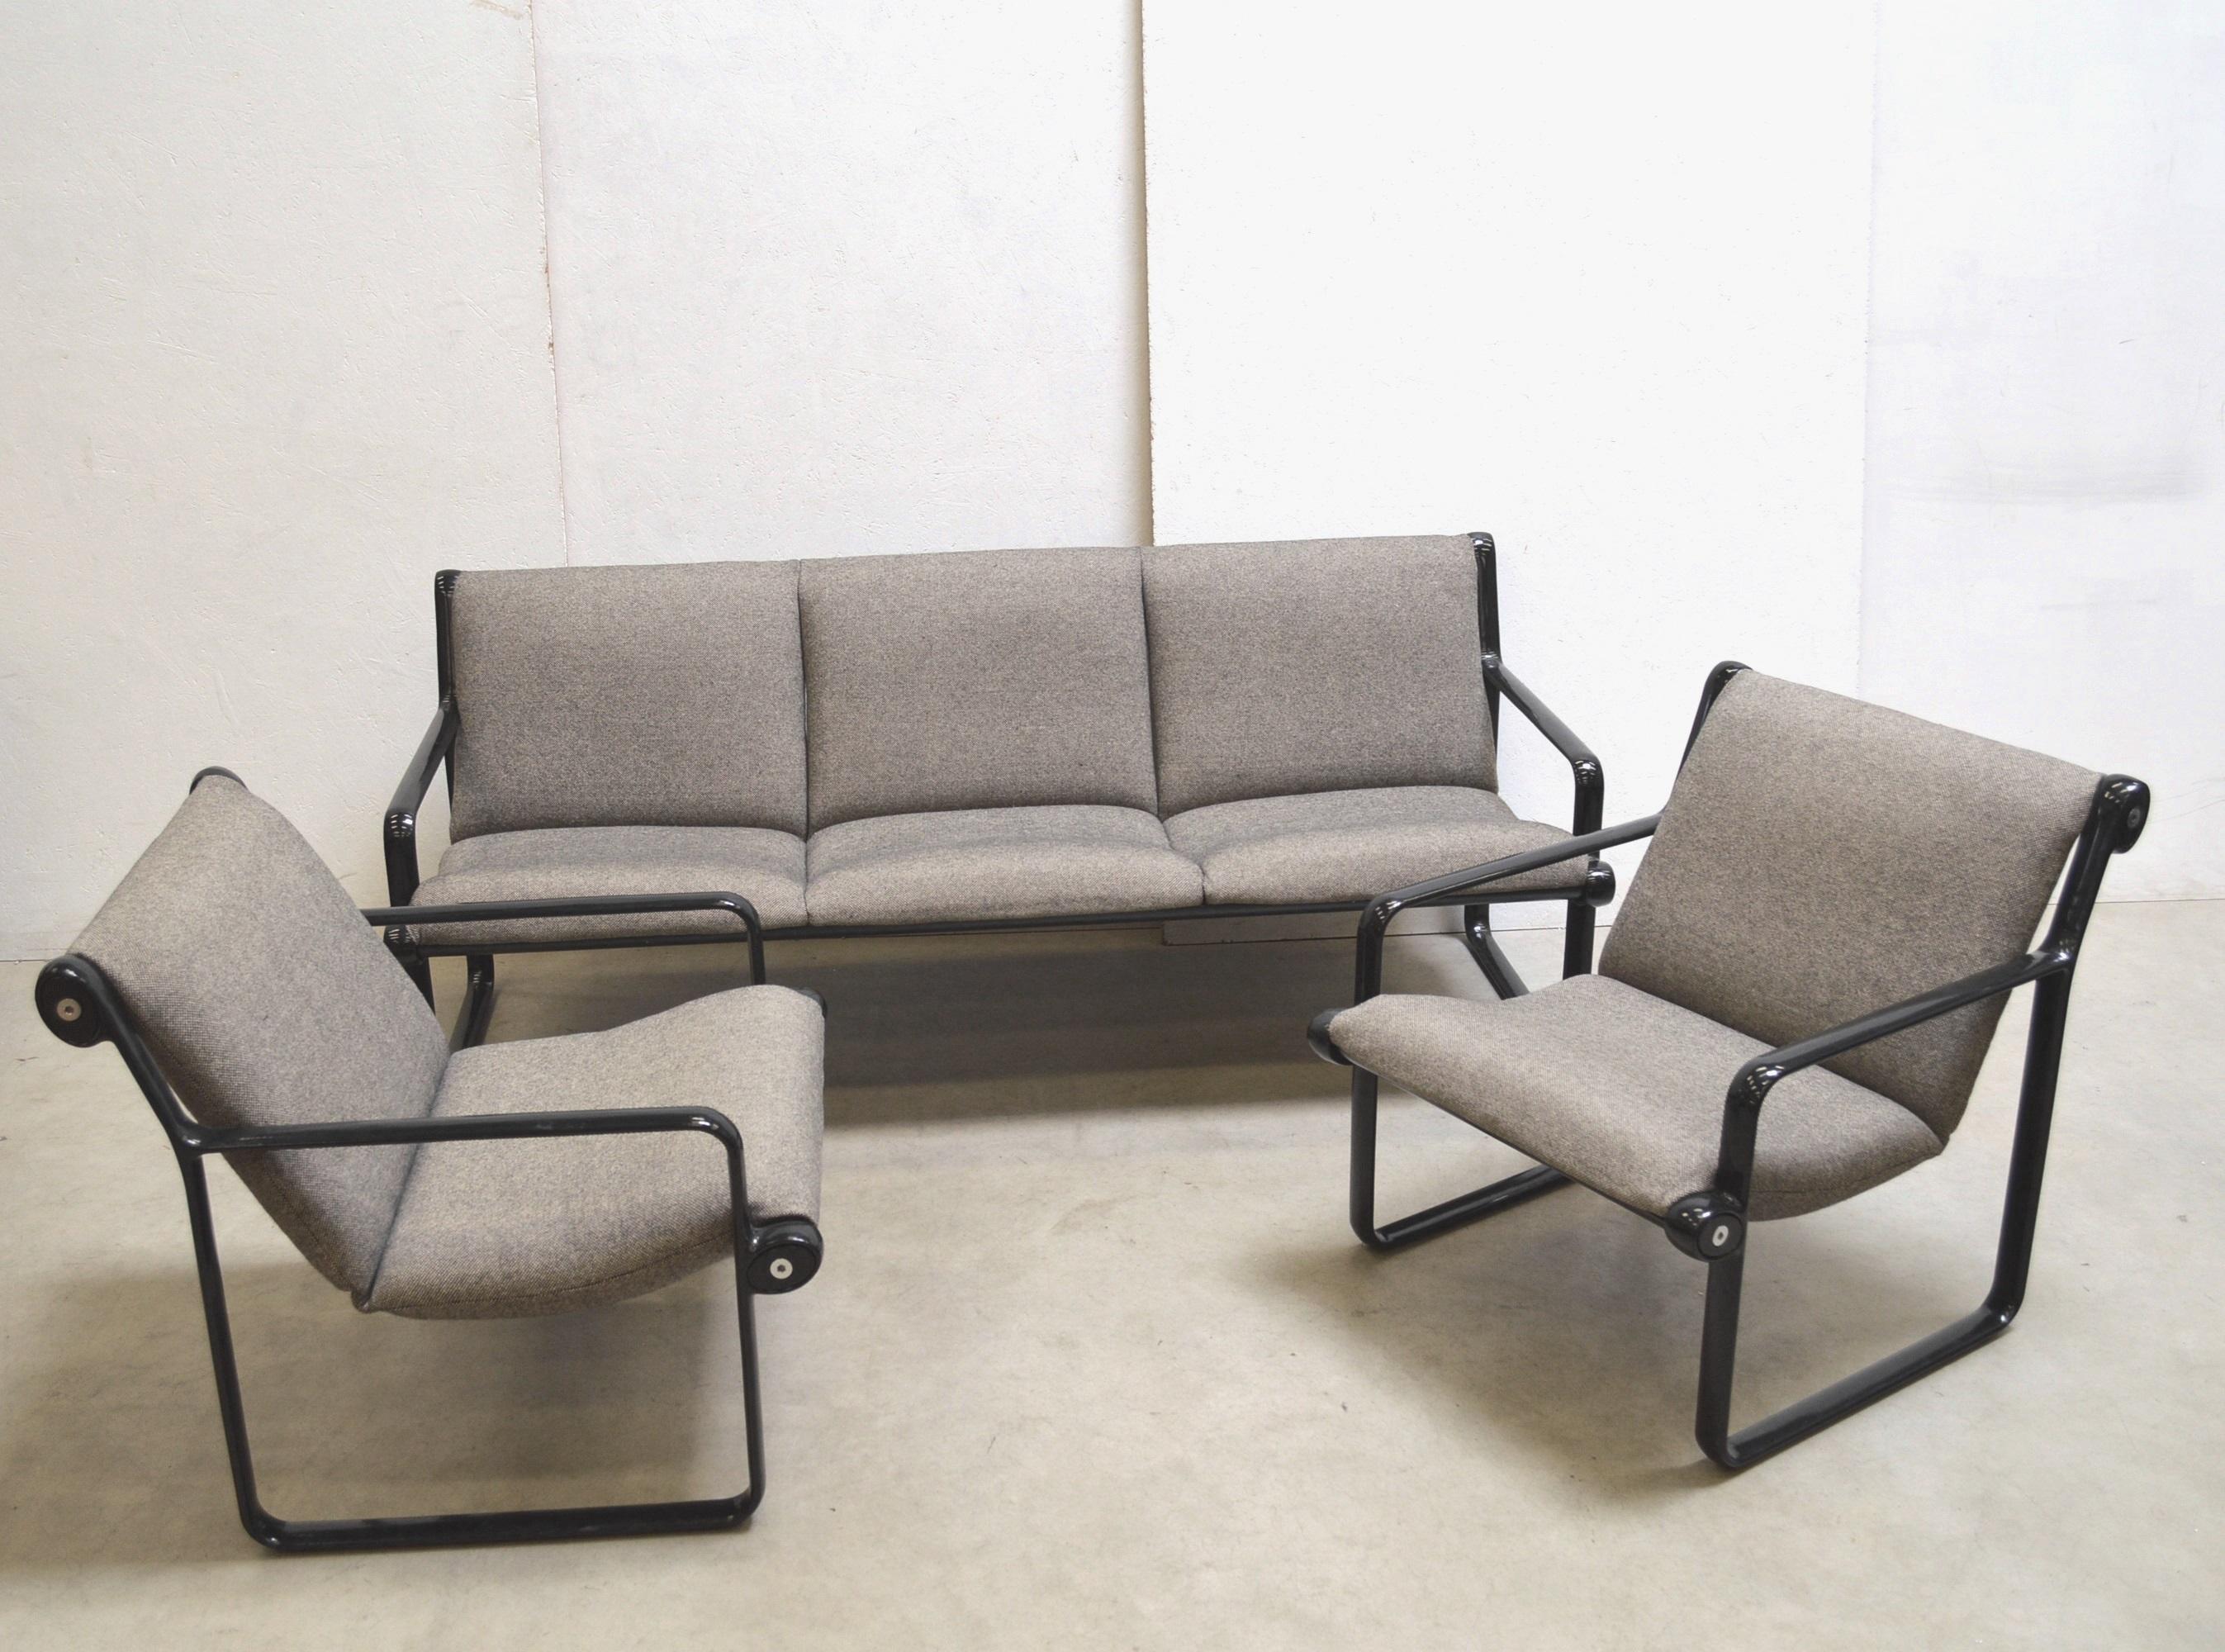 Metal Sofa & 2x Chairs Model Sling by Bruce Hannah & Andrew Morrison for Knoll 1970s